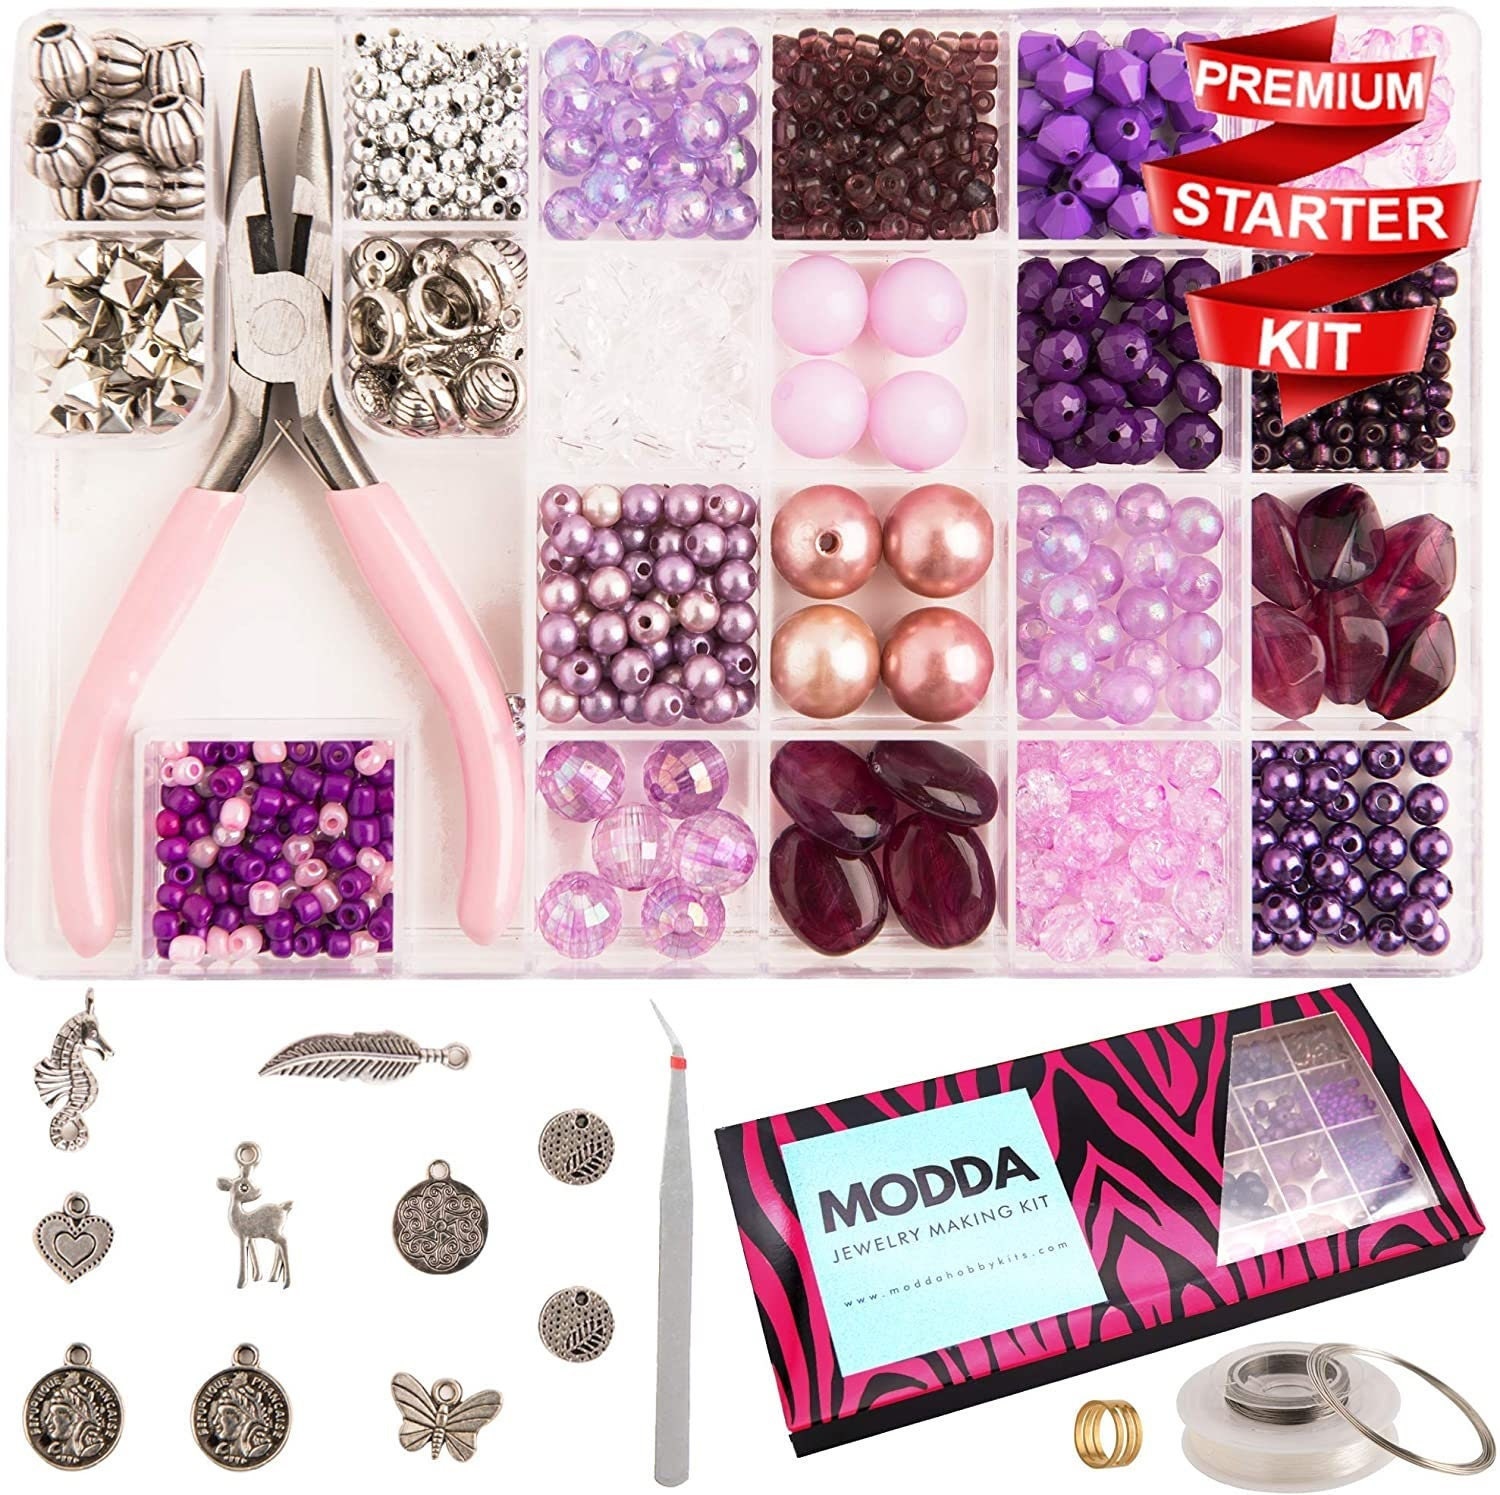 Modda Epoxy Resin Kit with Video Course, Includes Color Pigment, Silicone Molds, Necklace Cord, Earring Hooks for Jewelry Making, Epoxy Resin